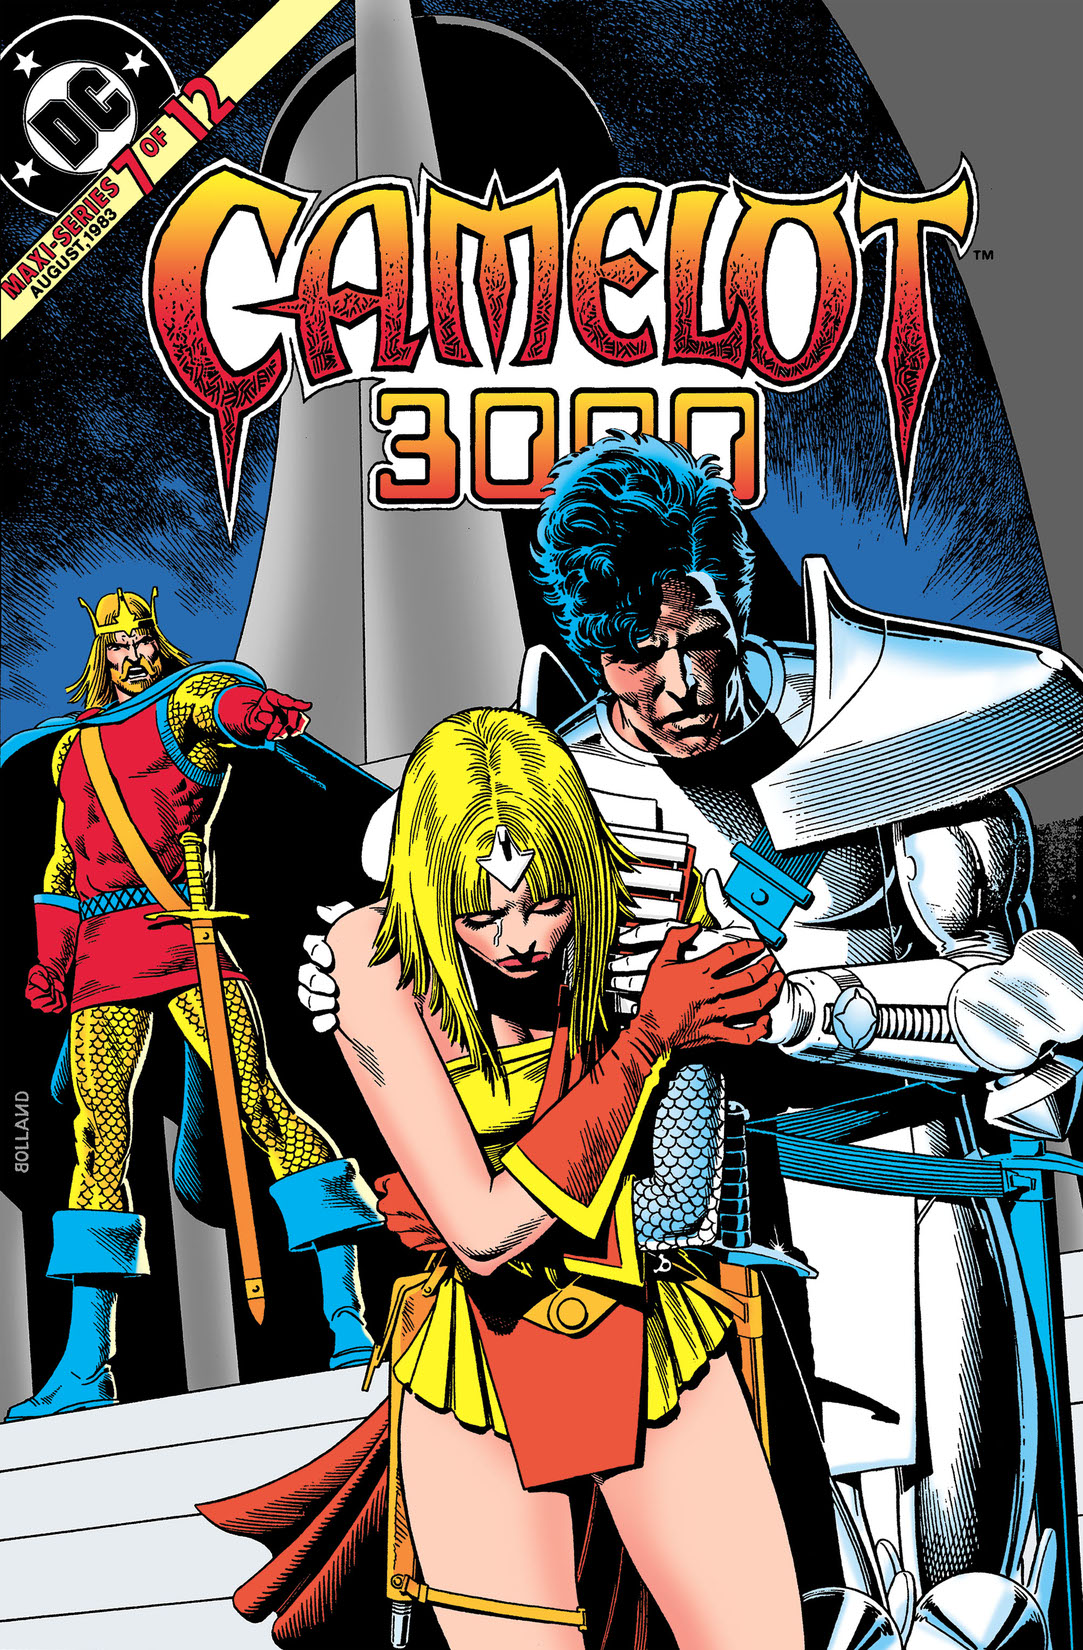 Camelot 3000 #7 preview images